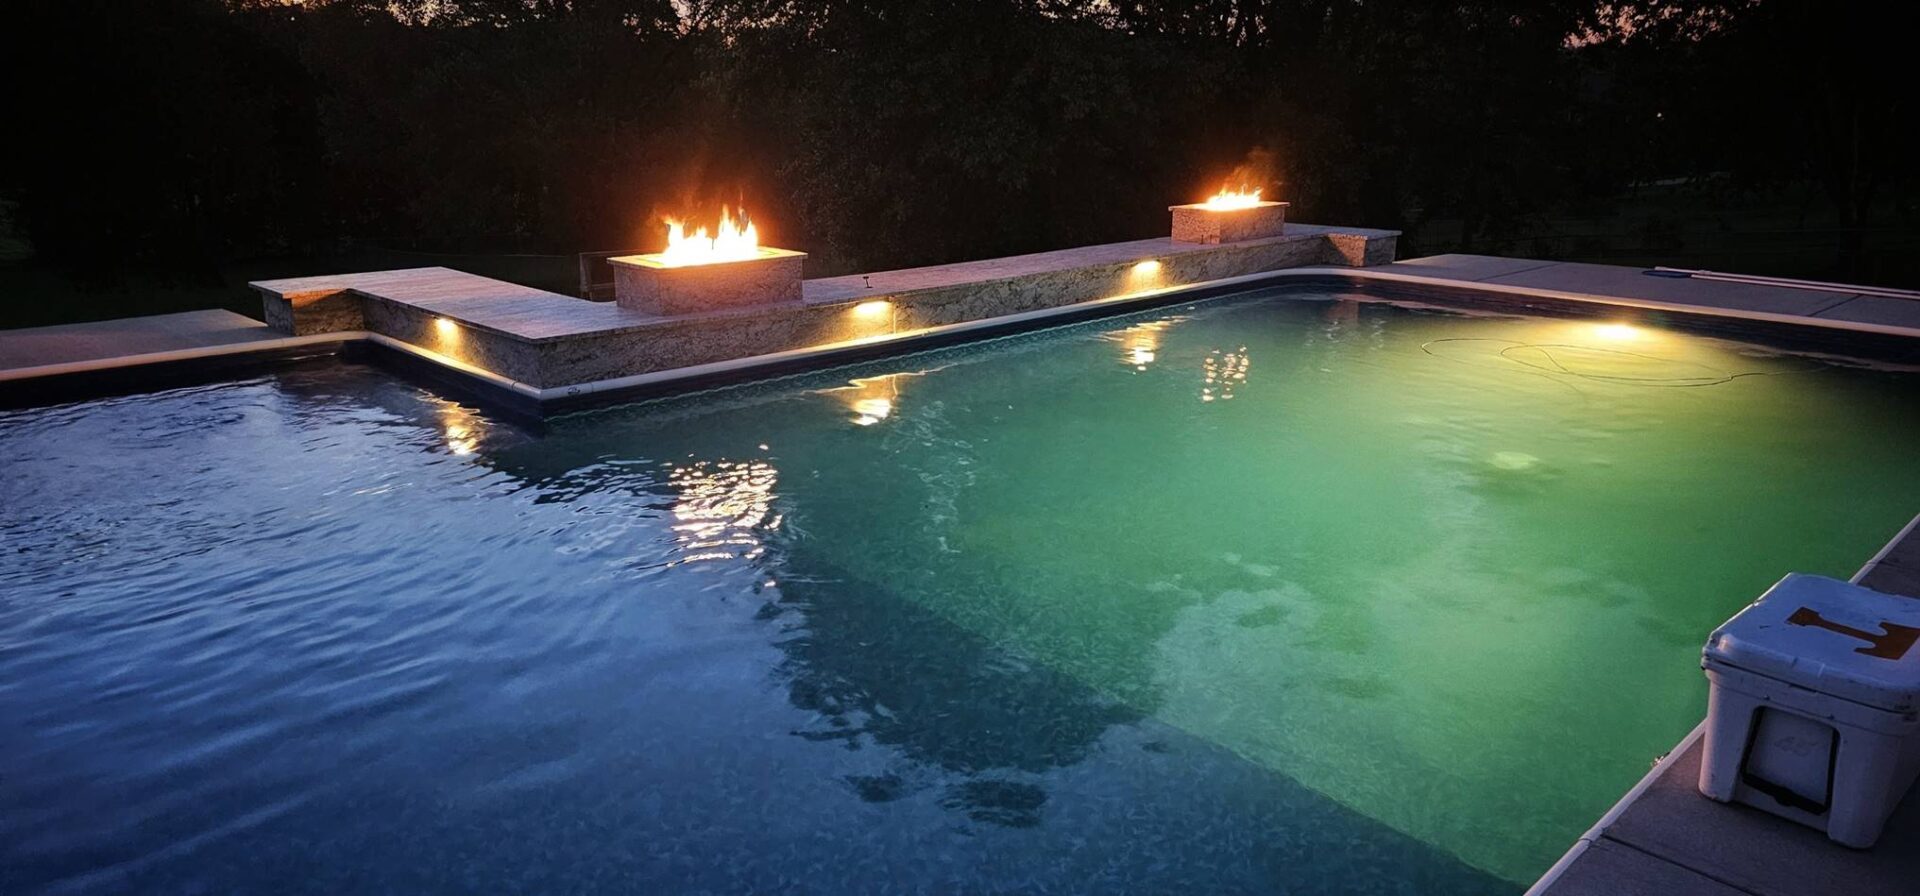 A pool with fire pits and lights on the side.